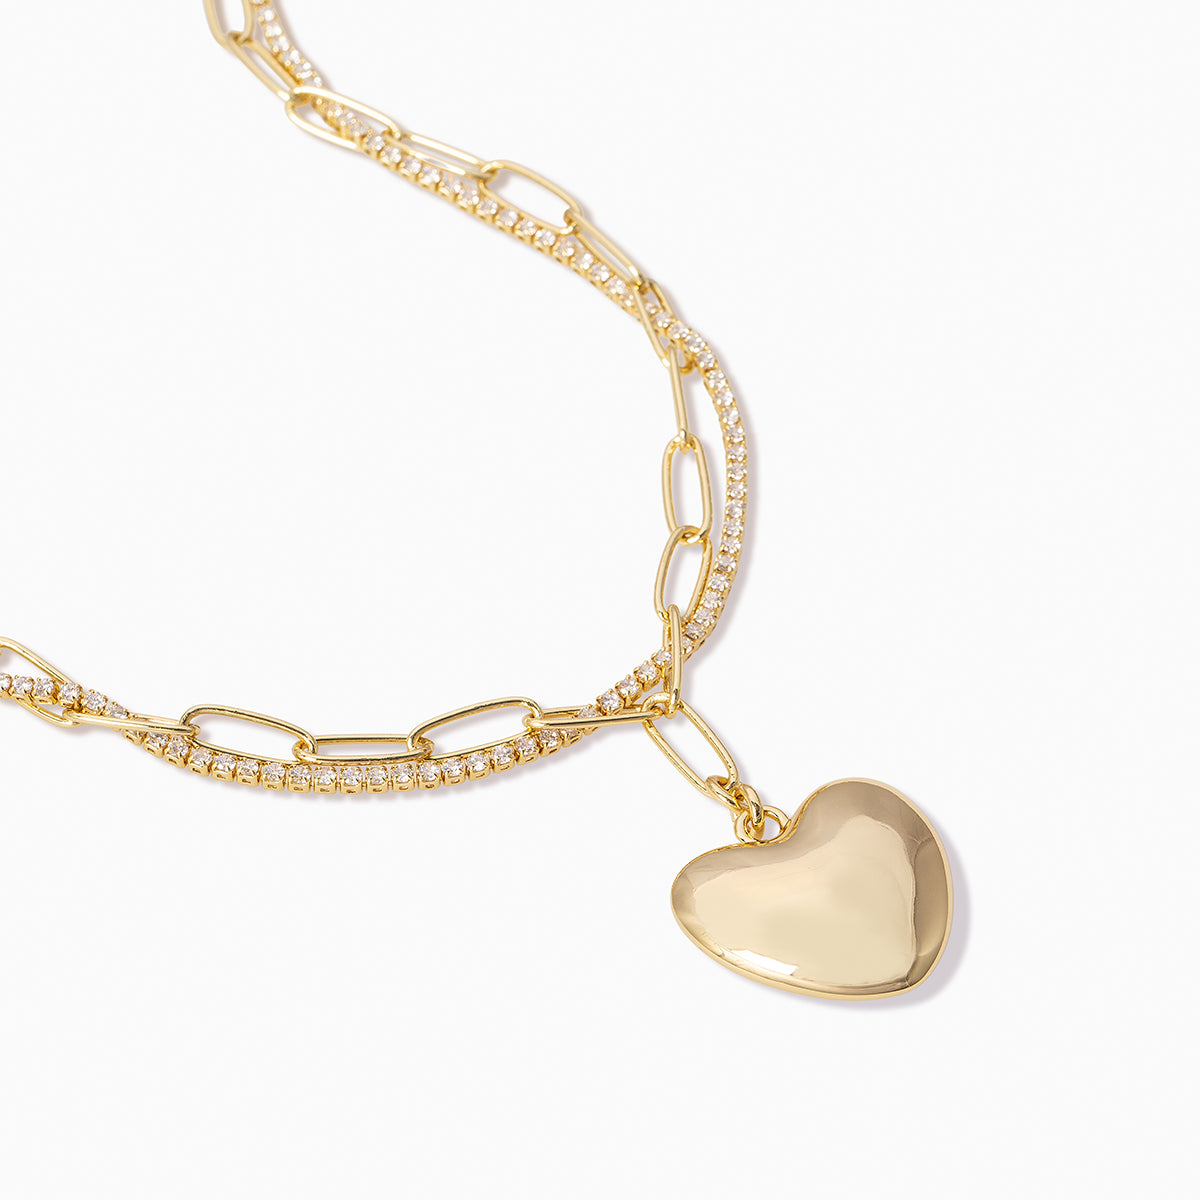 Intertwined Chain and Heart Necklace | Gold | Product Detail Image | Uncommon James